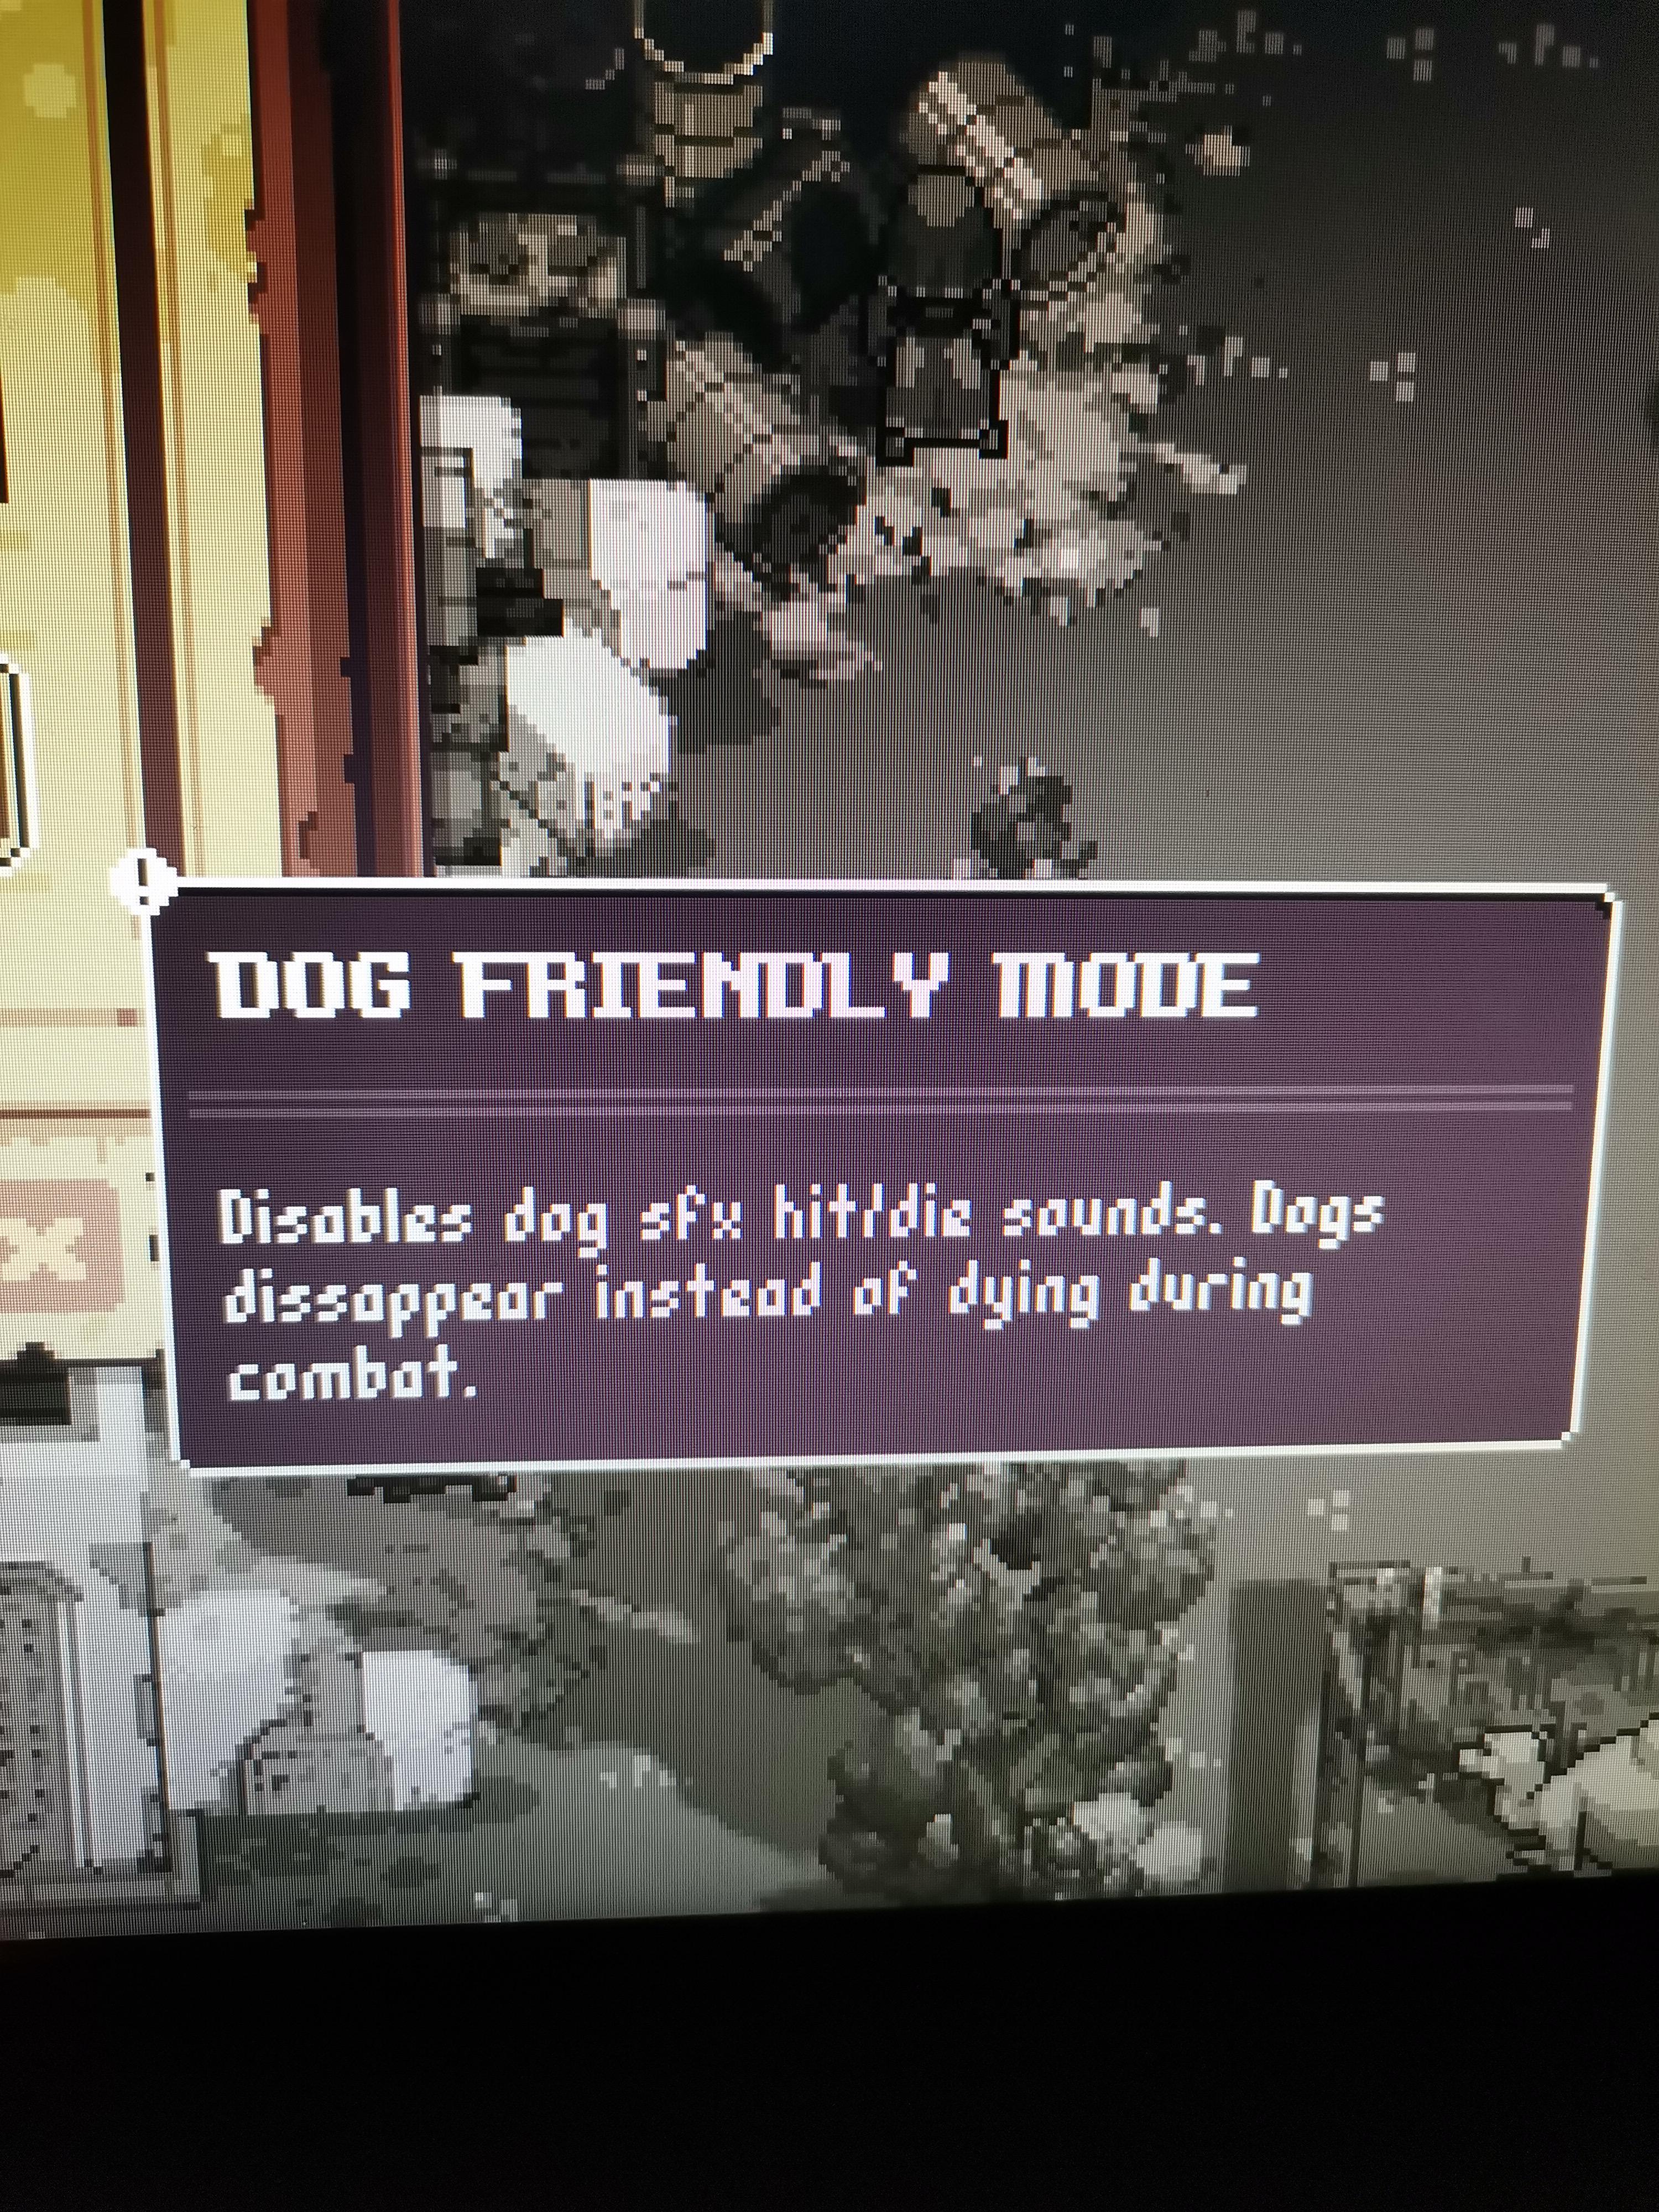 cool pics and memes - screenshot - Dog Friendly Mode x Disables dog sfx hitdie sounds. Dogs dissappear instead of dying during combat.